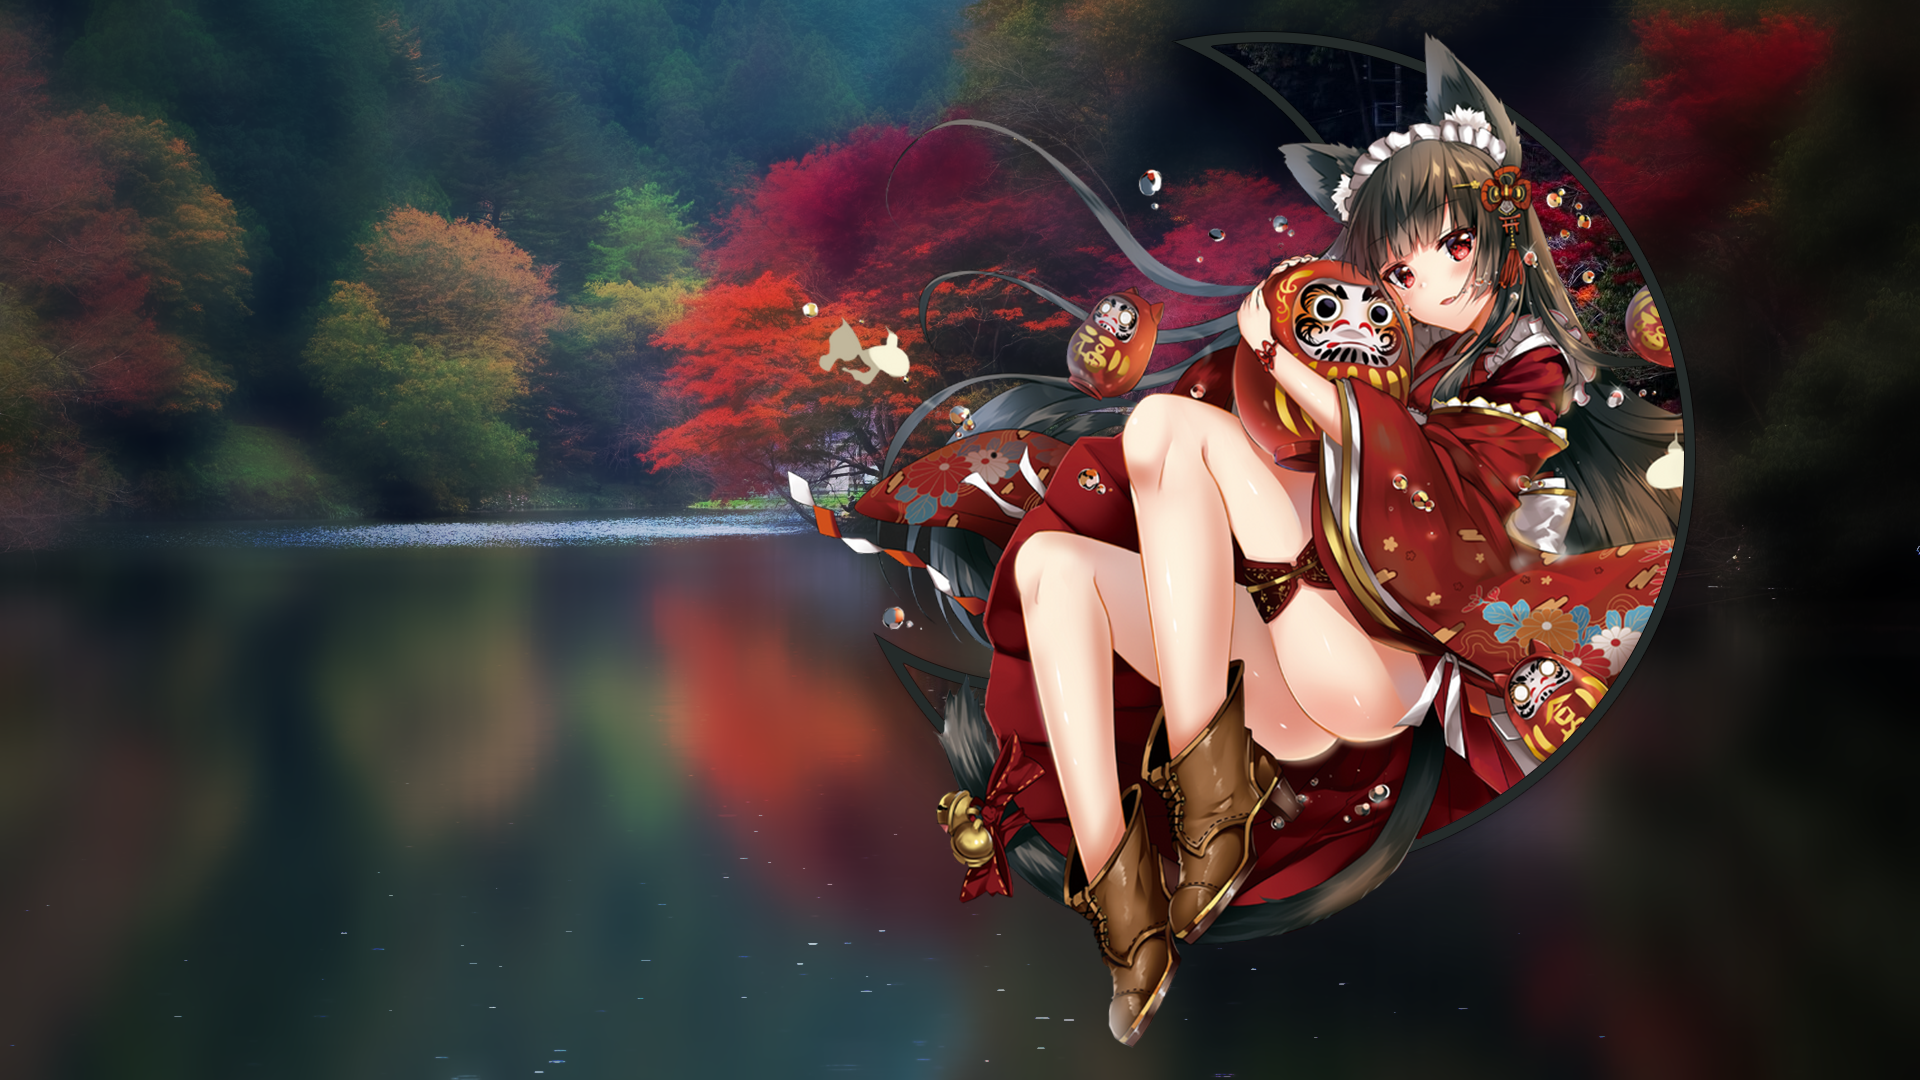 Anime 1920x1080 picture-in-picture forest lake fall